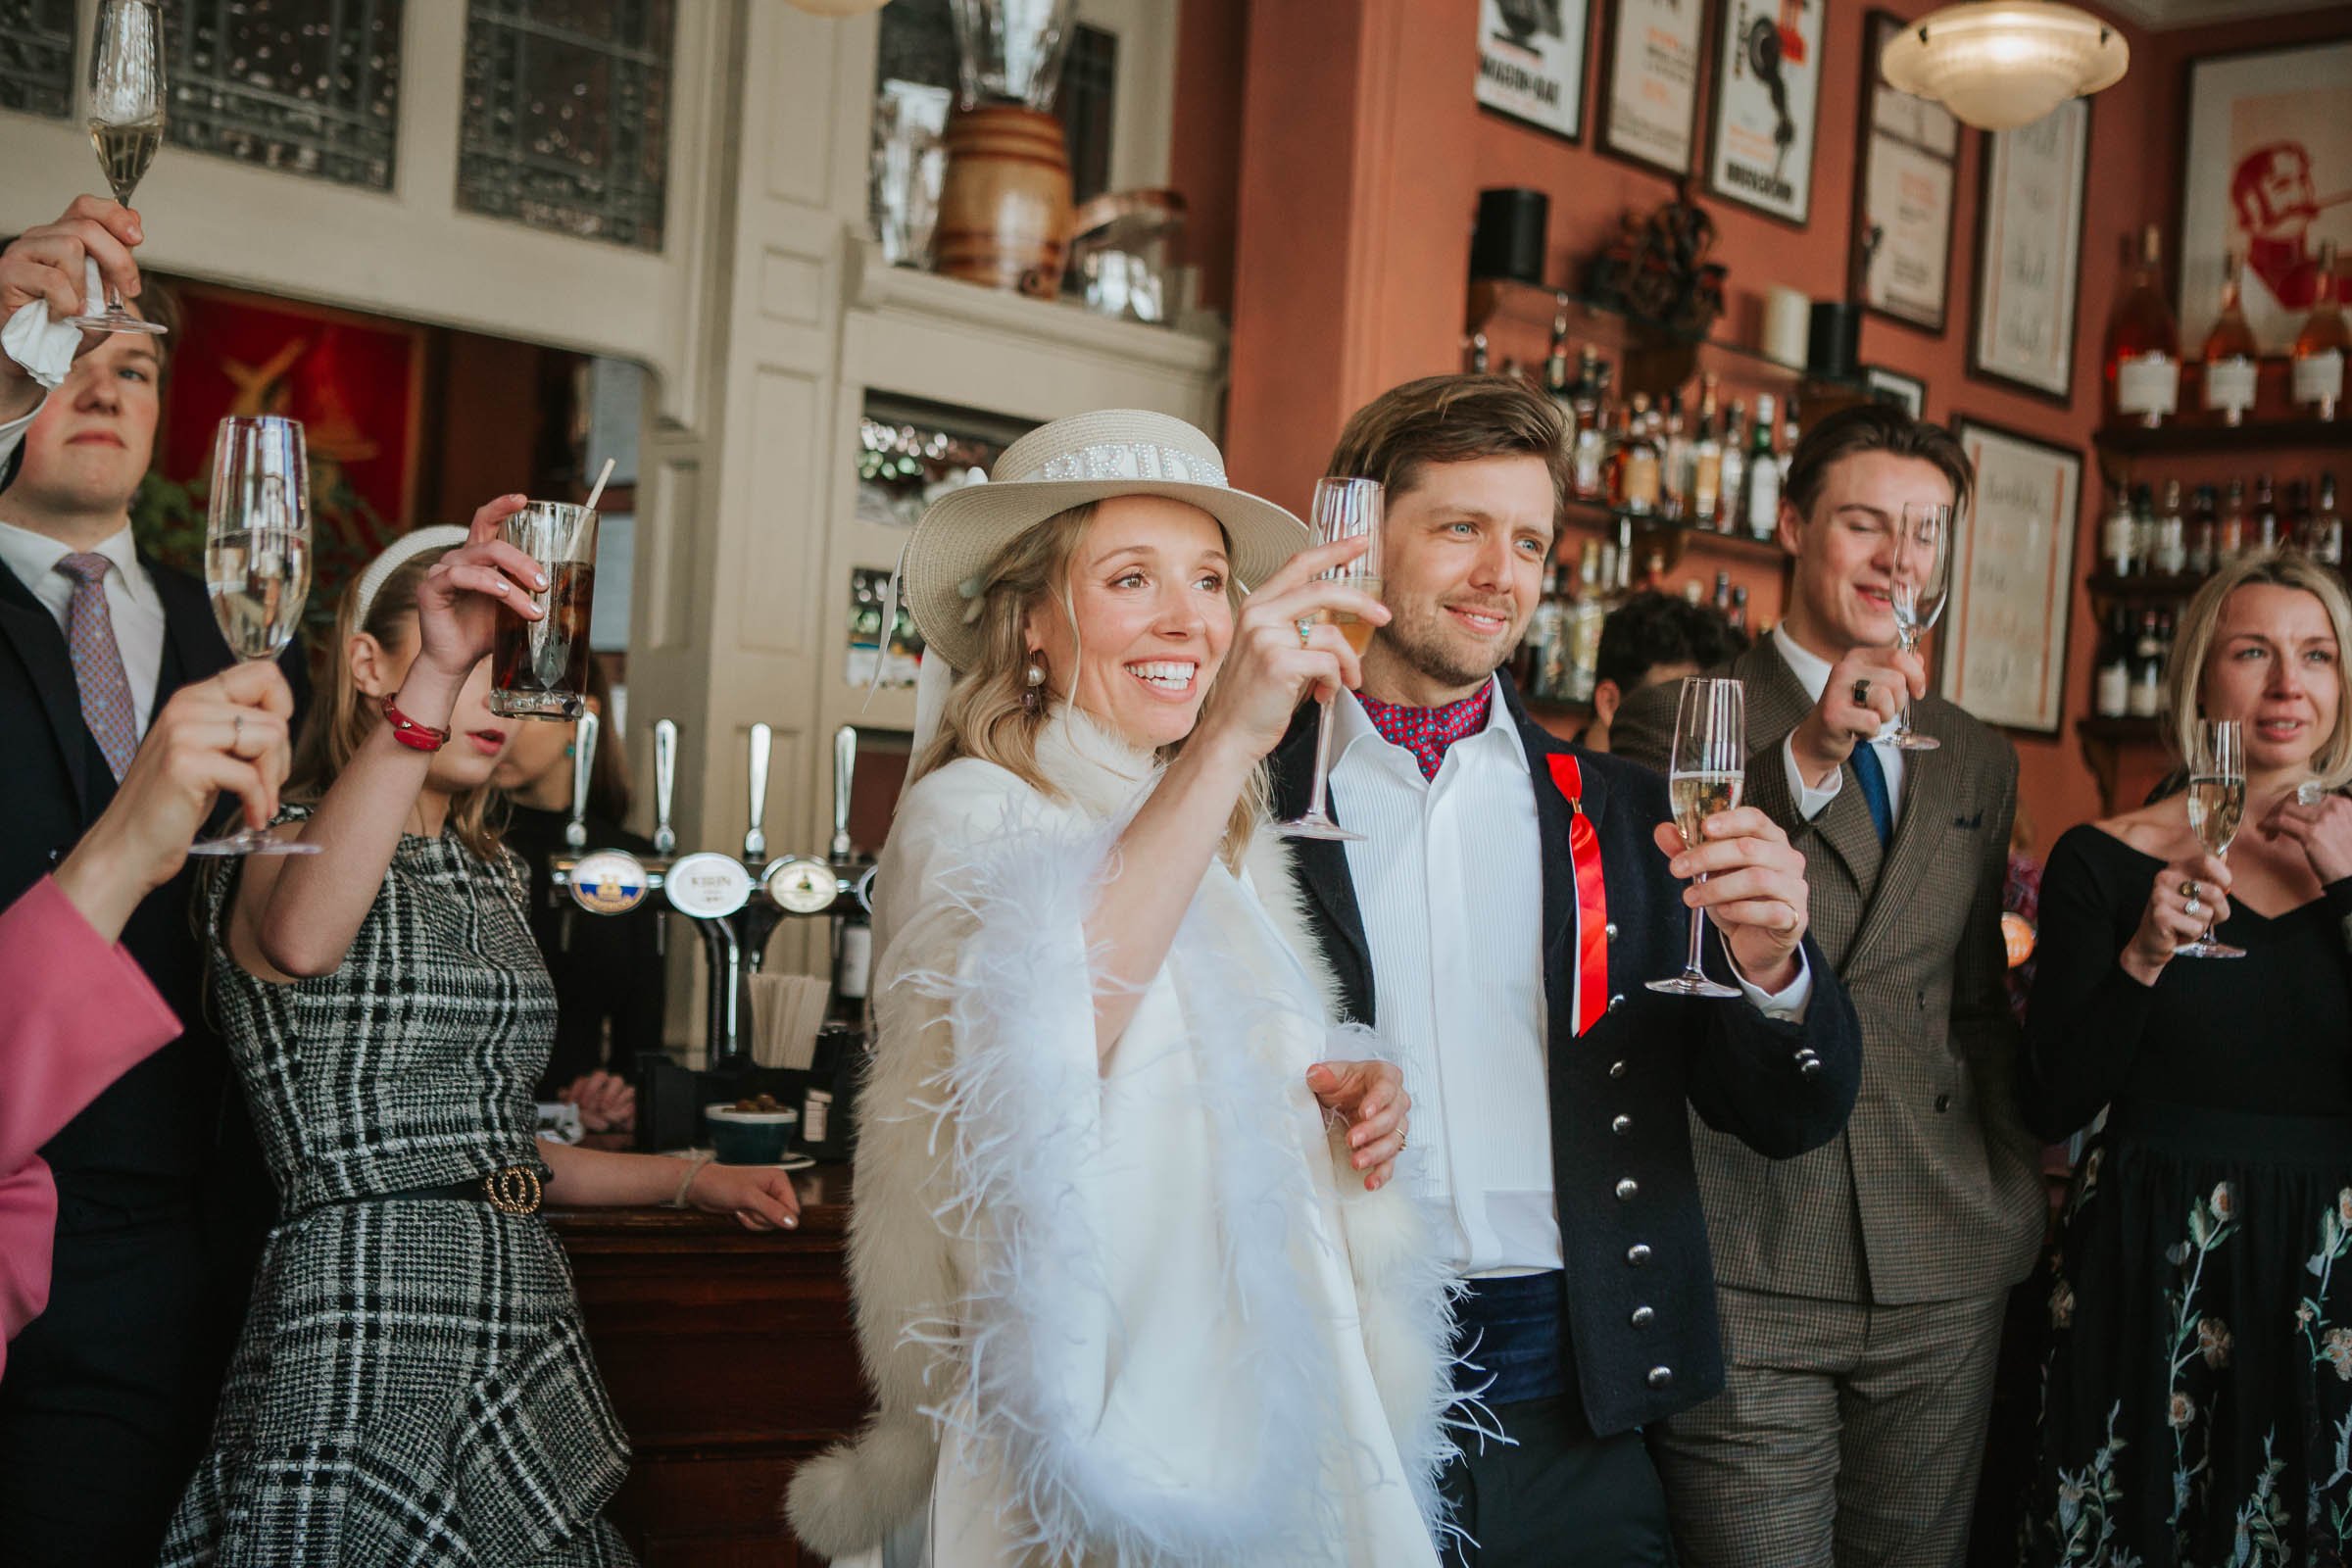  Guests and the bride and groom raise their glasses to a toast after the wedding speeches inside The Surprise Pub in Chelsea. 